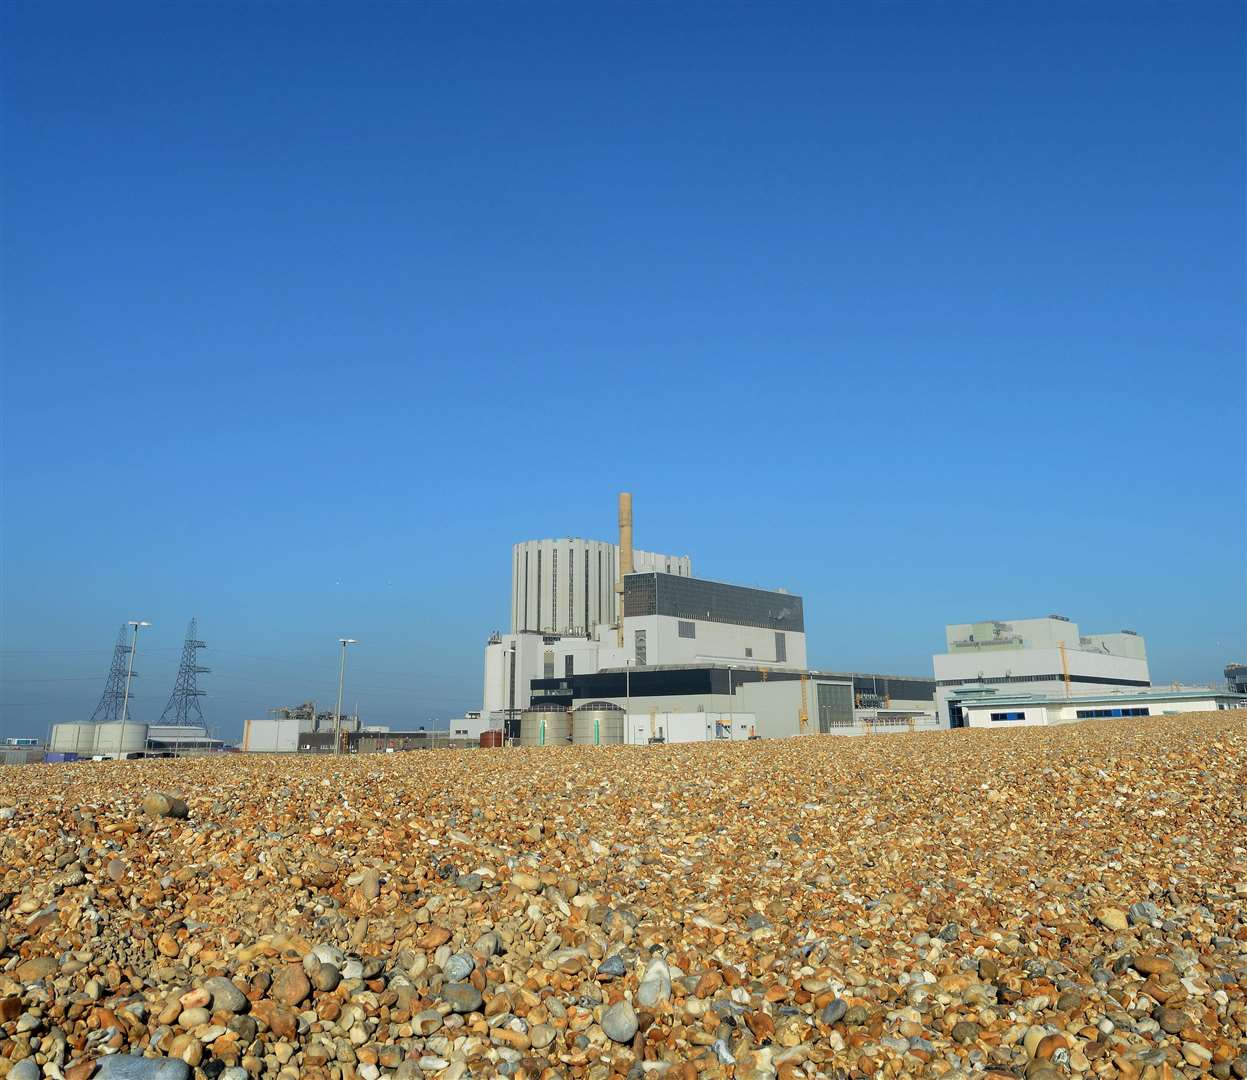 Dungeness B power station (3701037)